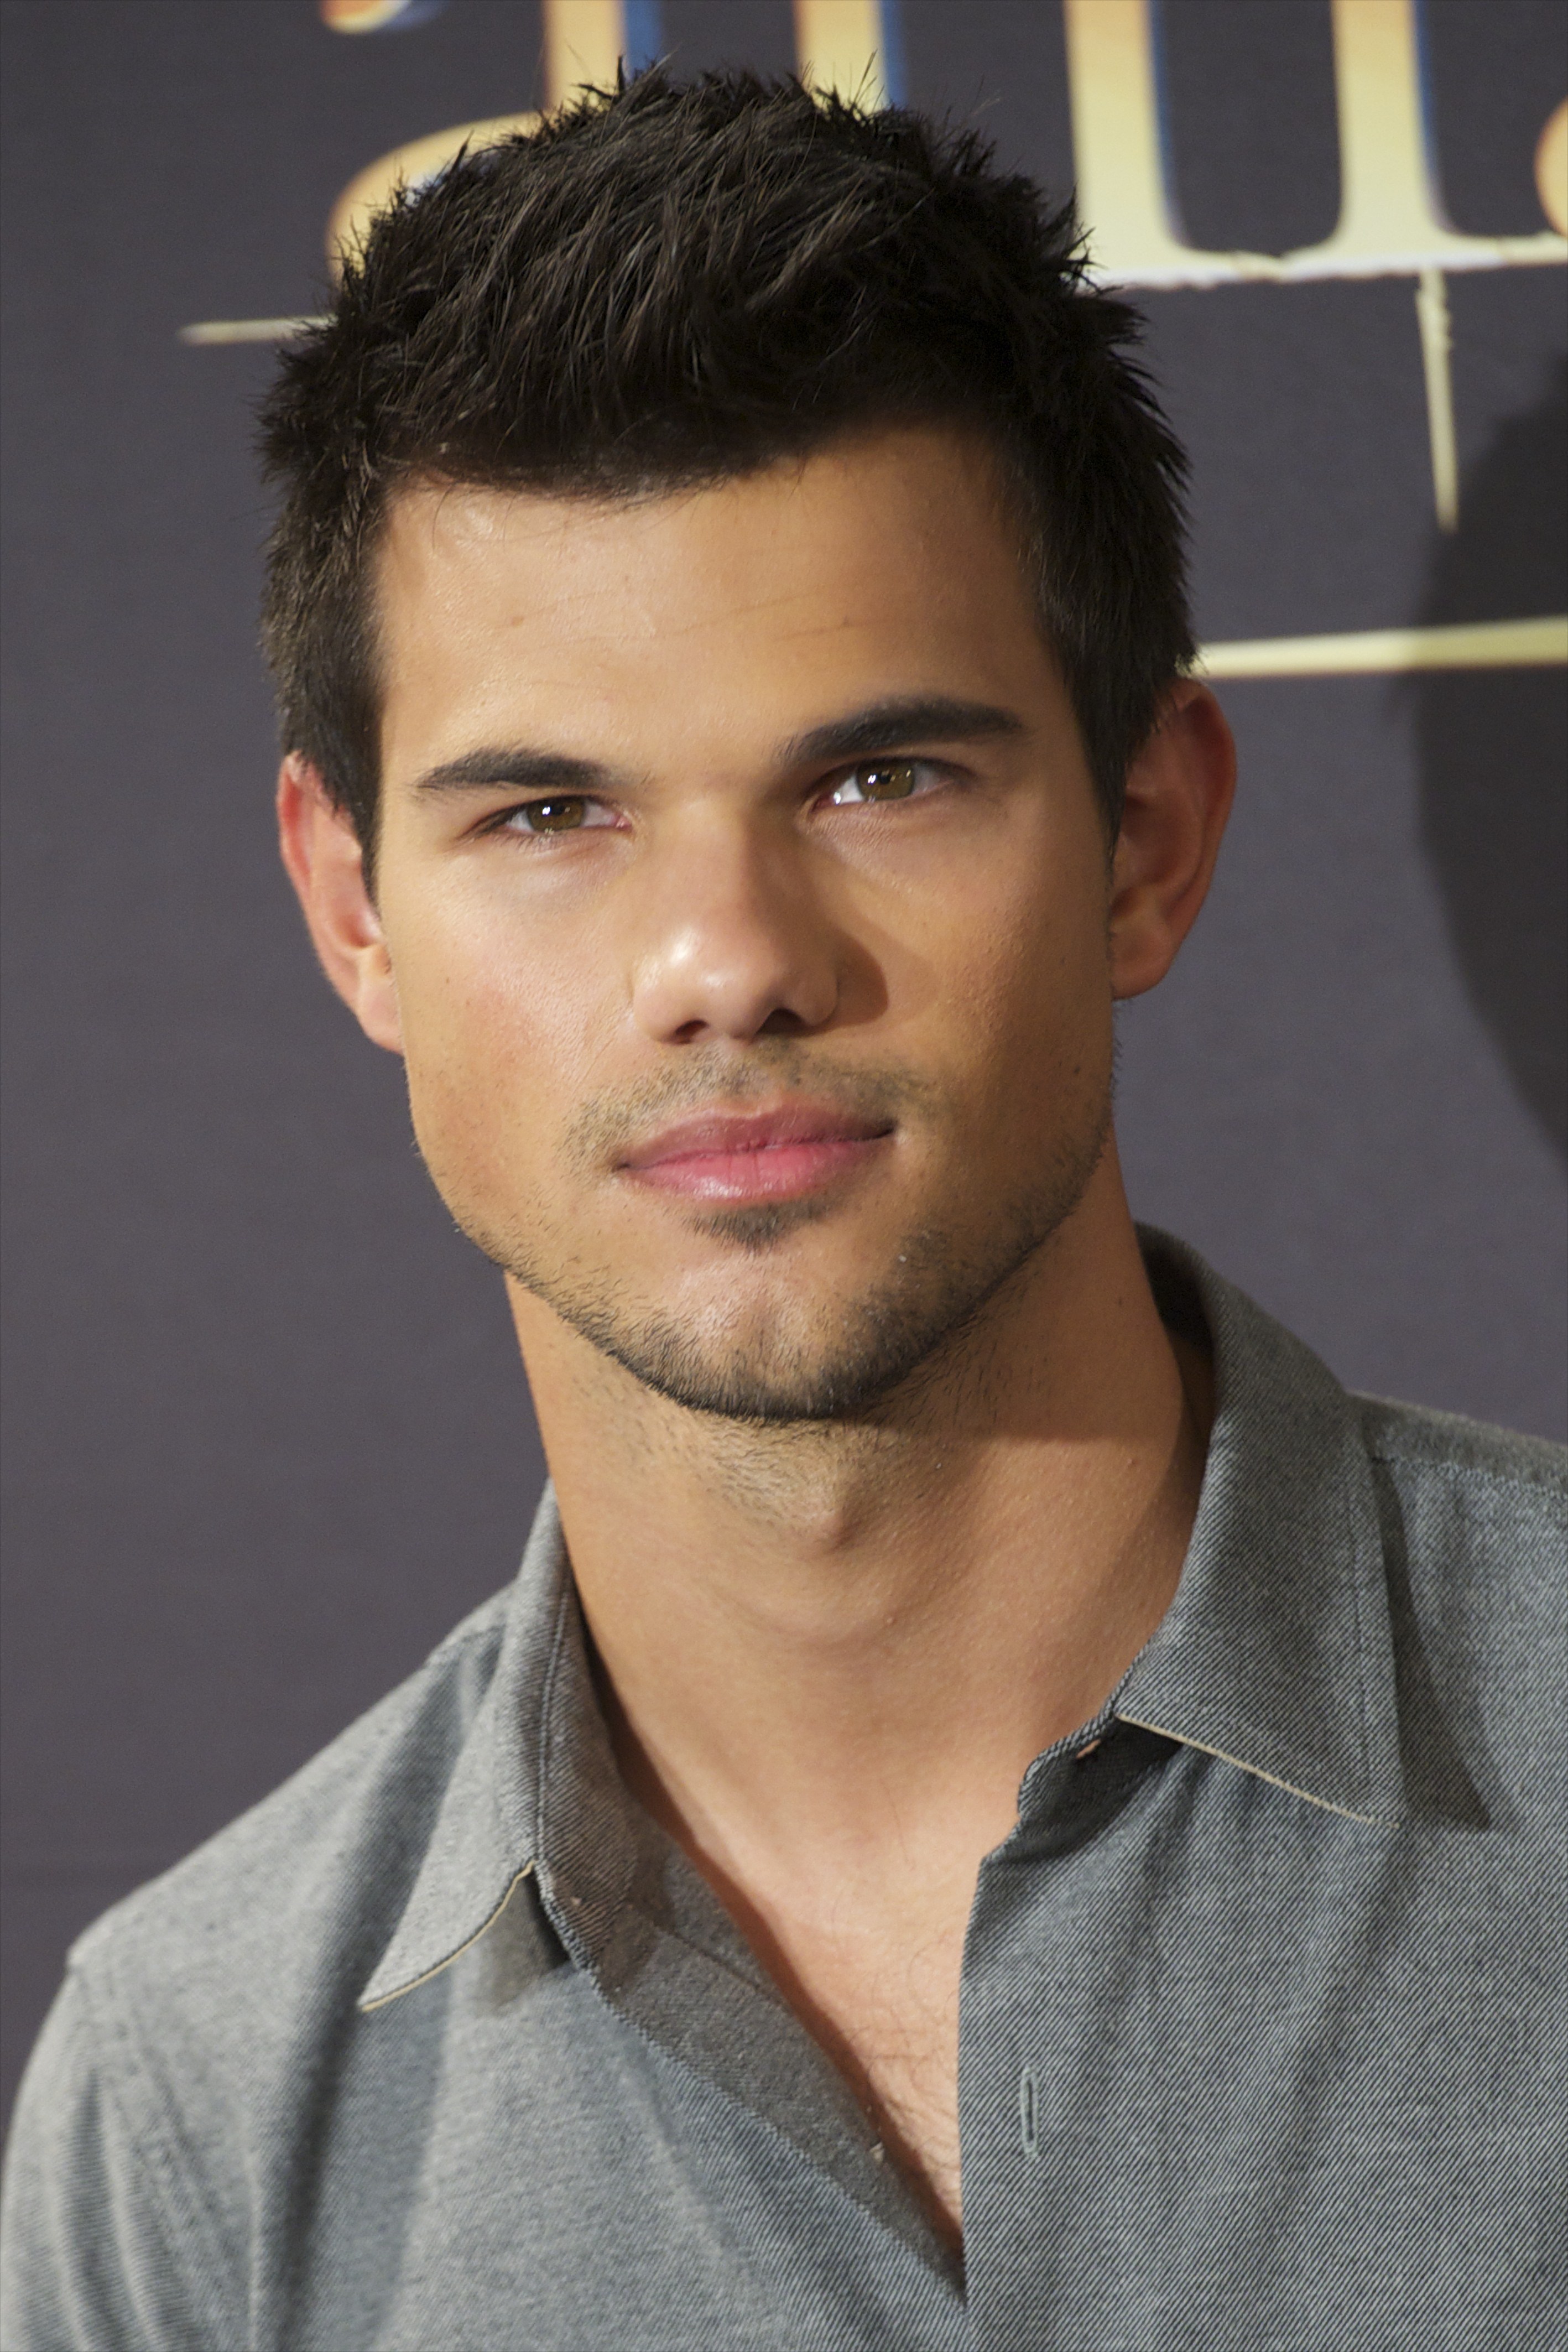 'The Twilight Saga: Breaking Dawn - Part 2' Photocall at Villamagna Hotel Featuring: Taylor Lautner Where: Madrid, Spain When: 15 Nov 2012 Credit: Sean Thorton/WENN.com **Not Available for Publication in Spain and France**